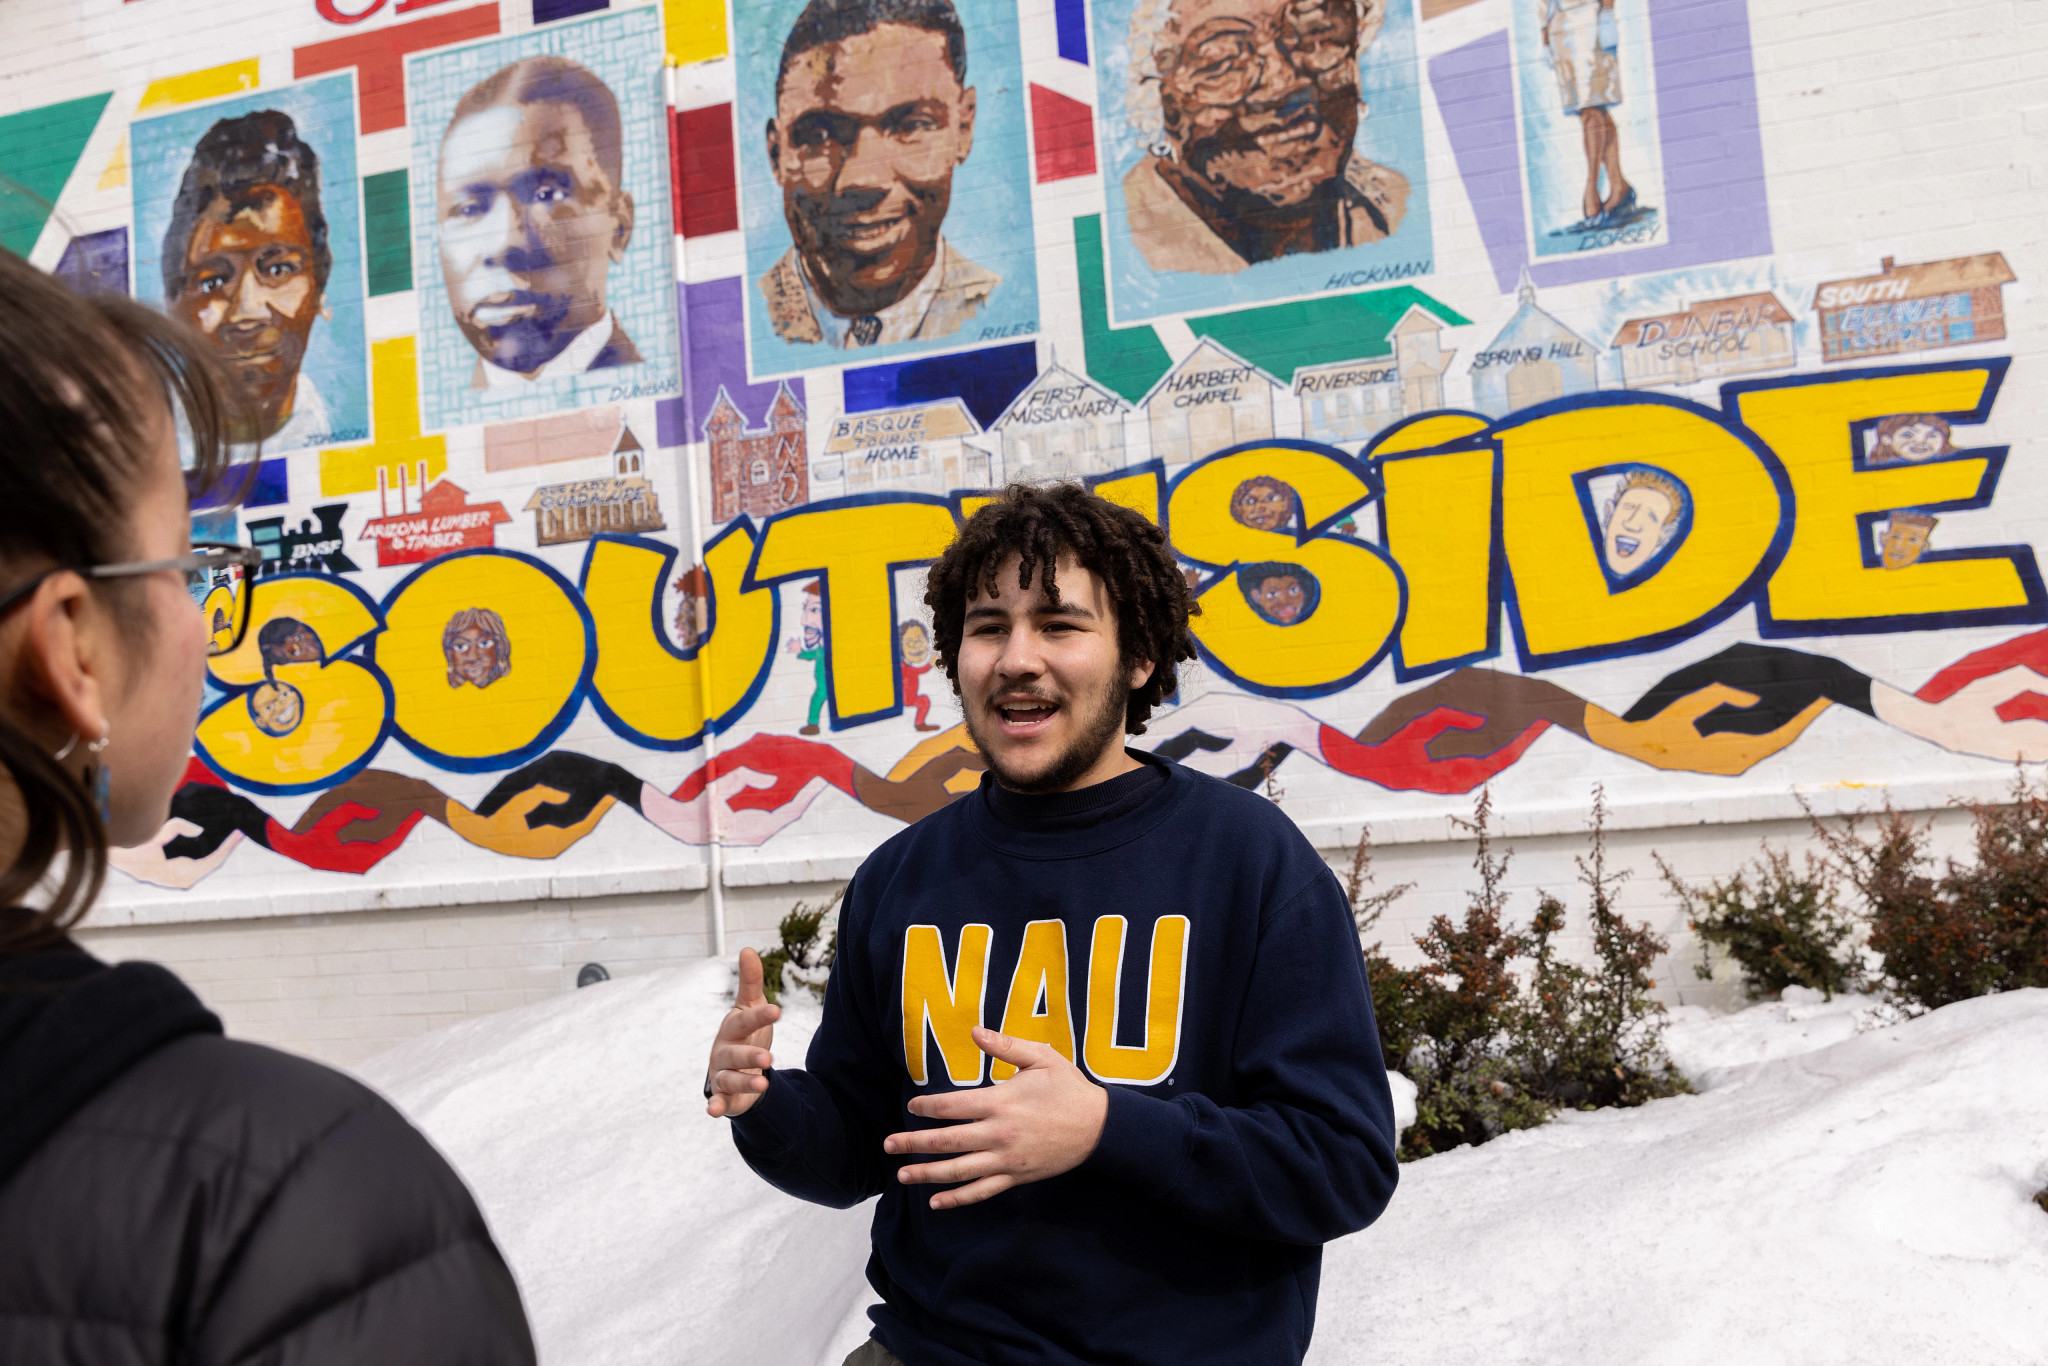 Undergraduate Ty Holliday talking with visitor in front of the Murdoch Community Center mural.